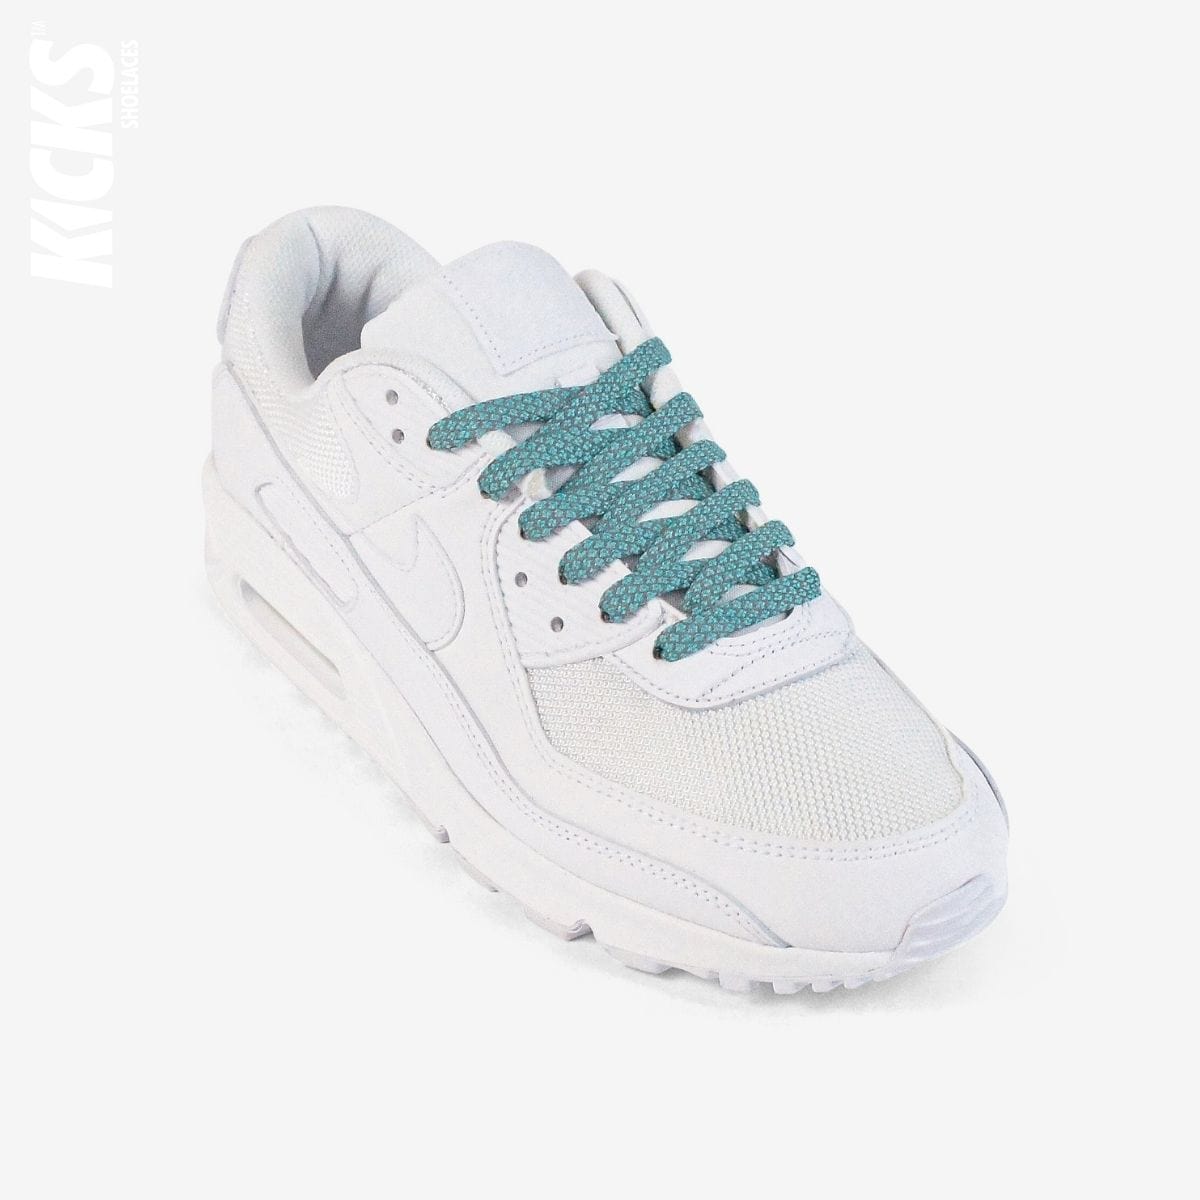 turquoise-reflective-colored-shoelaces-on-white-sneakers